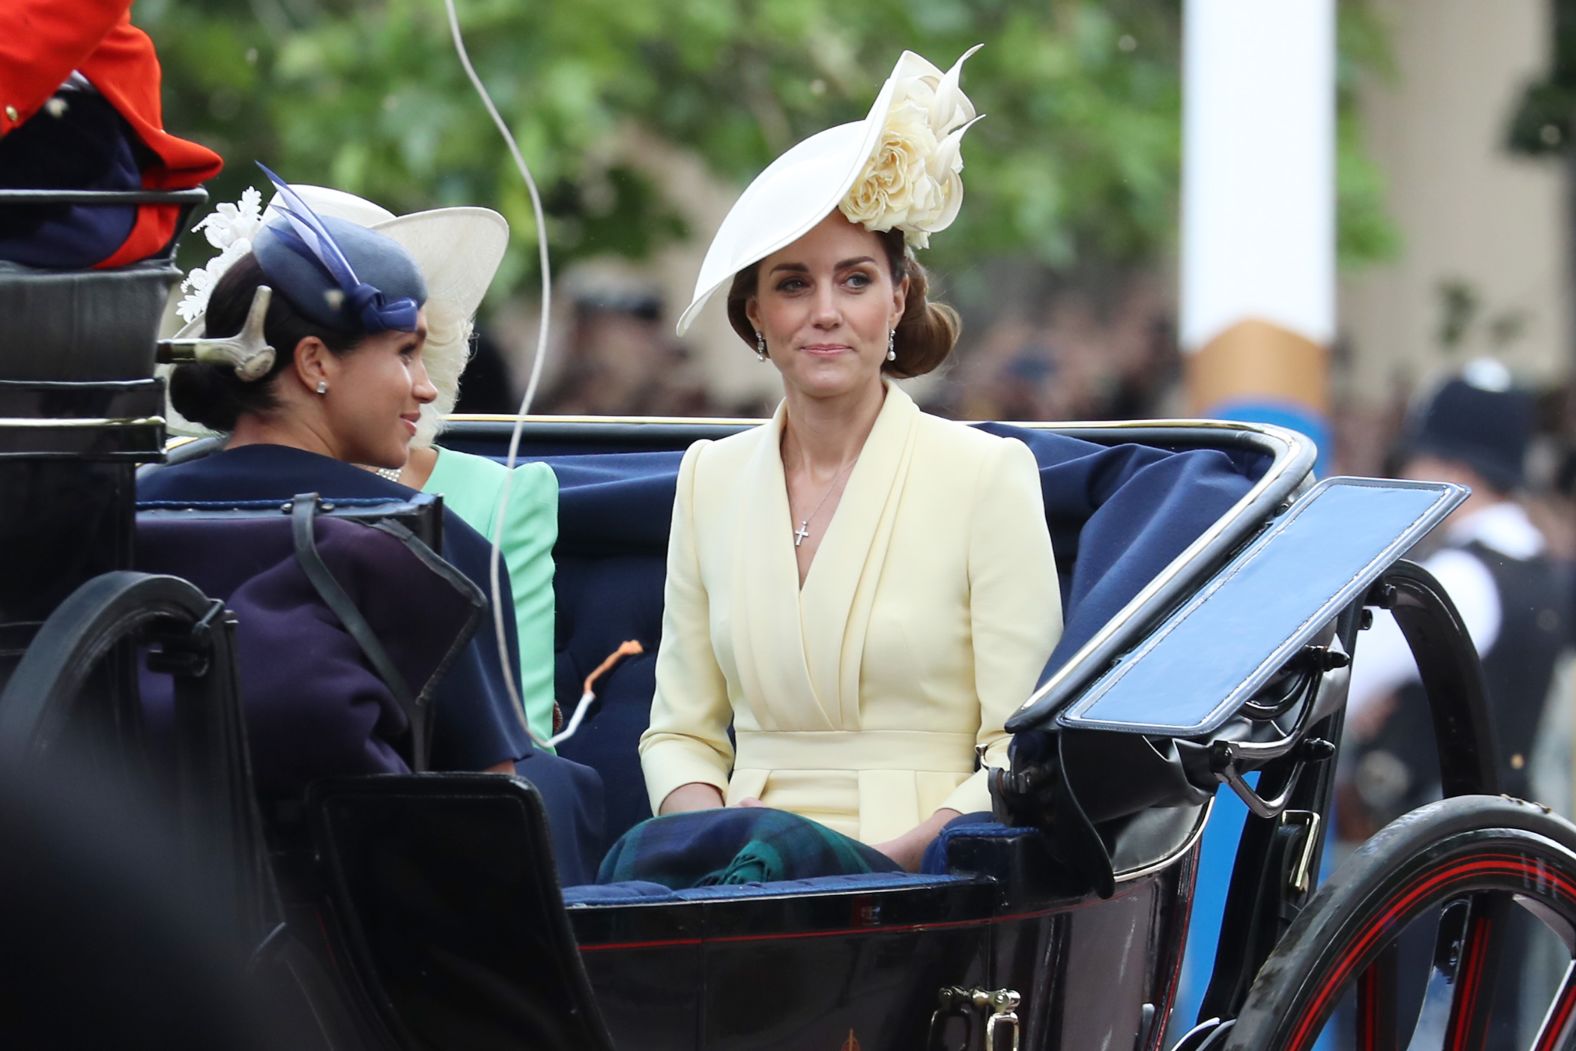 Meghan, the Duchess of Sussex, makes her first appearance in a public engagement since her son's birth, riding with Catherine, the Duchess of Cambridge.